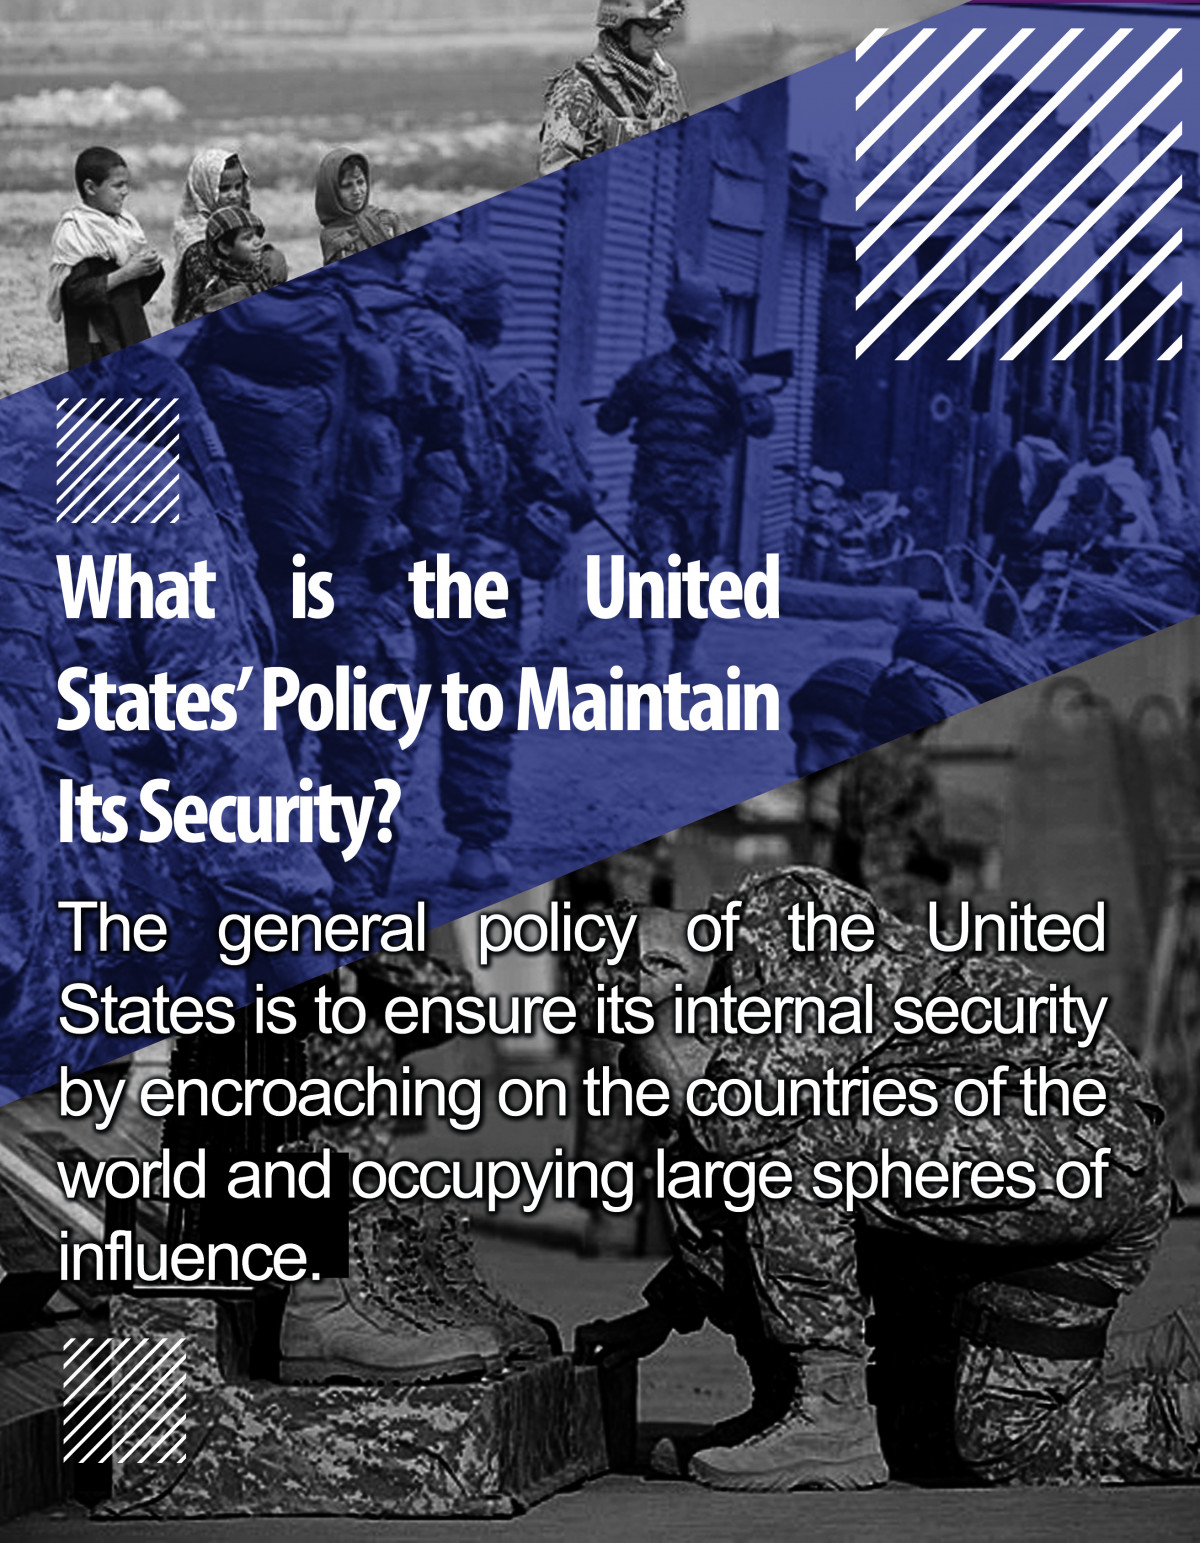 what is the United States policy to maintain its security?